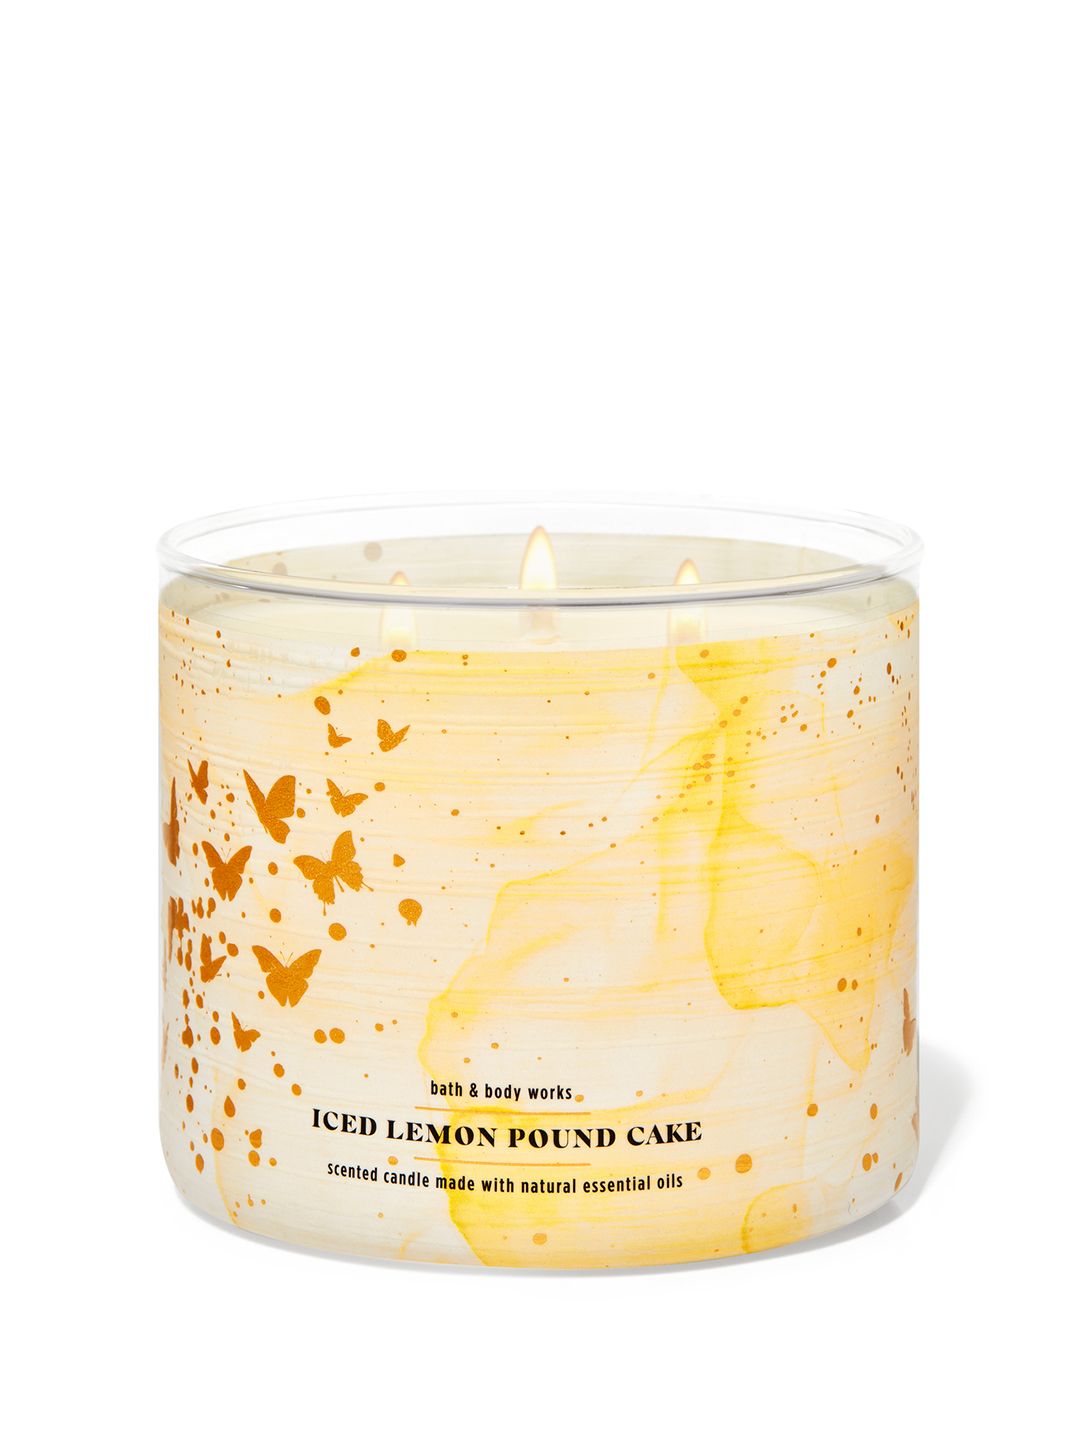 Bath & Body Works Iced Lemon Pound Cake 3-Wick Scented Candle - 411 g Price in India